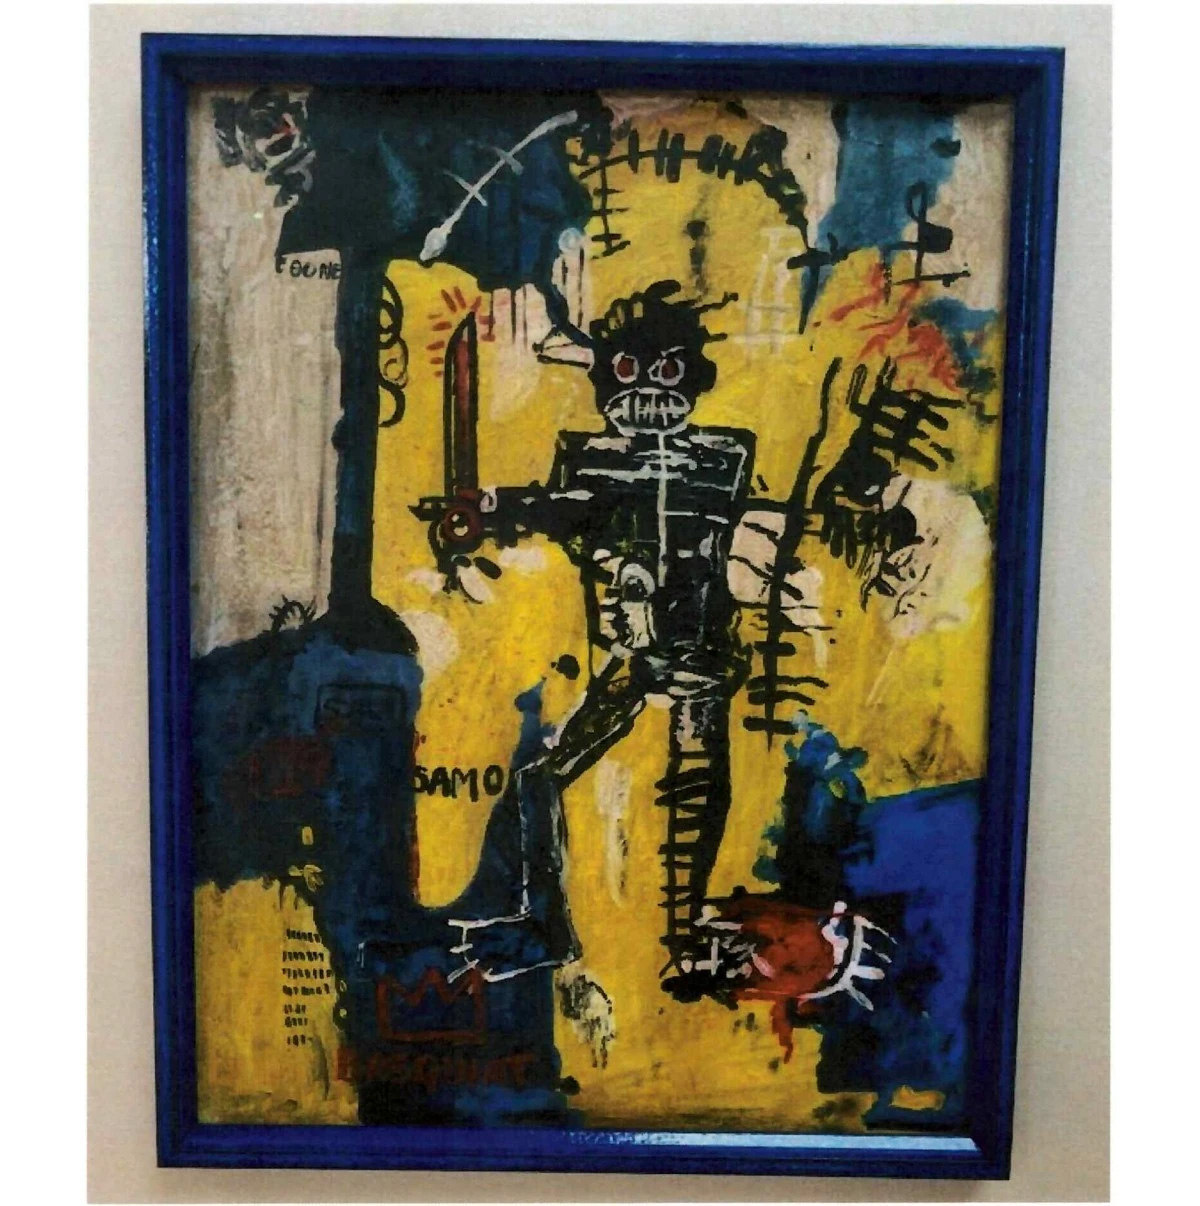 Florida Dealer Charged for Selling Allegedly Fake Art by Basquiat, Warhol